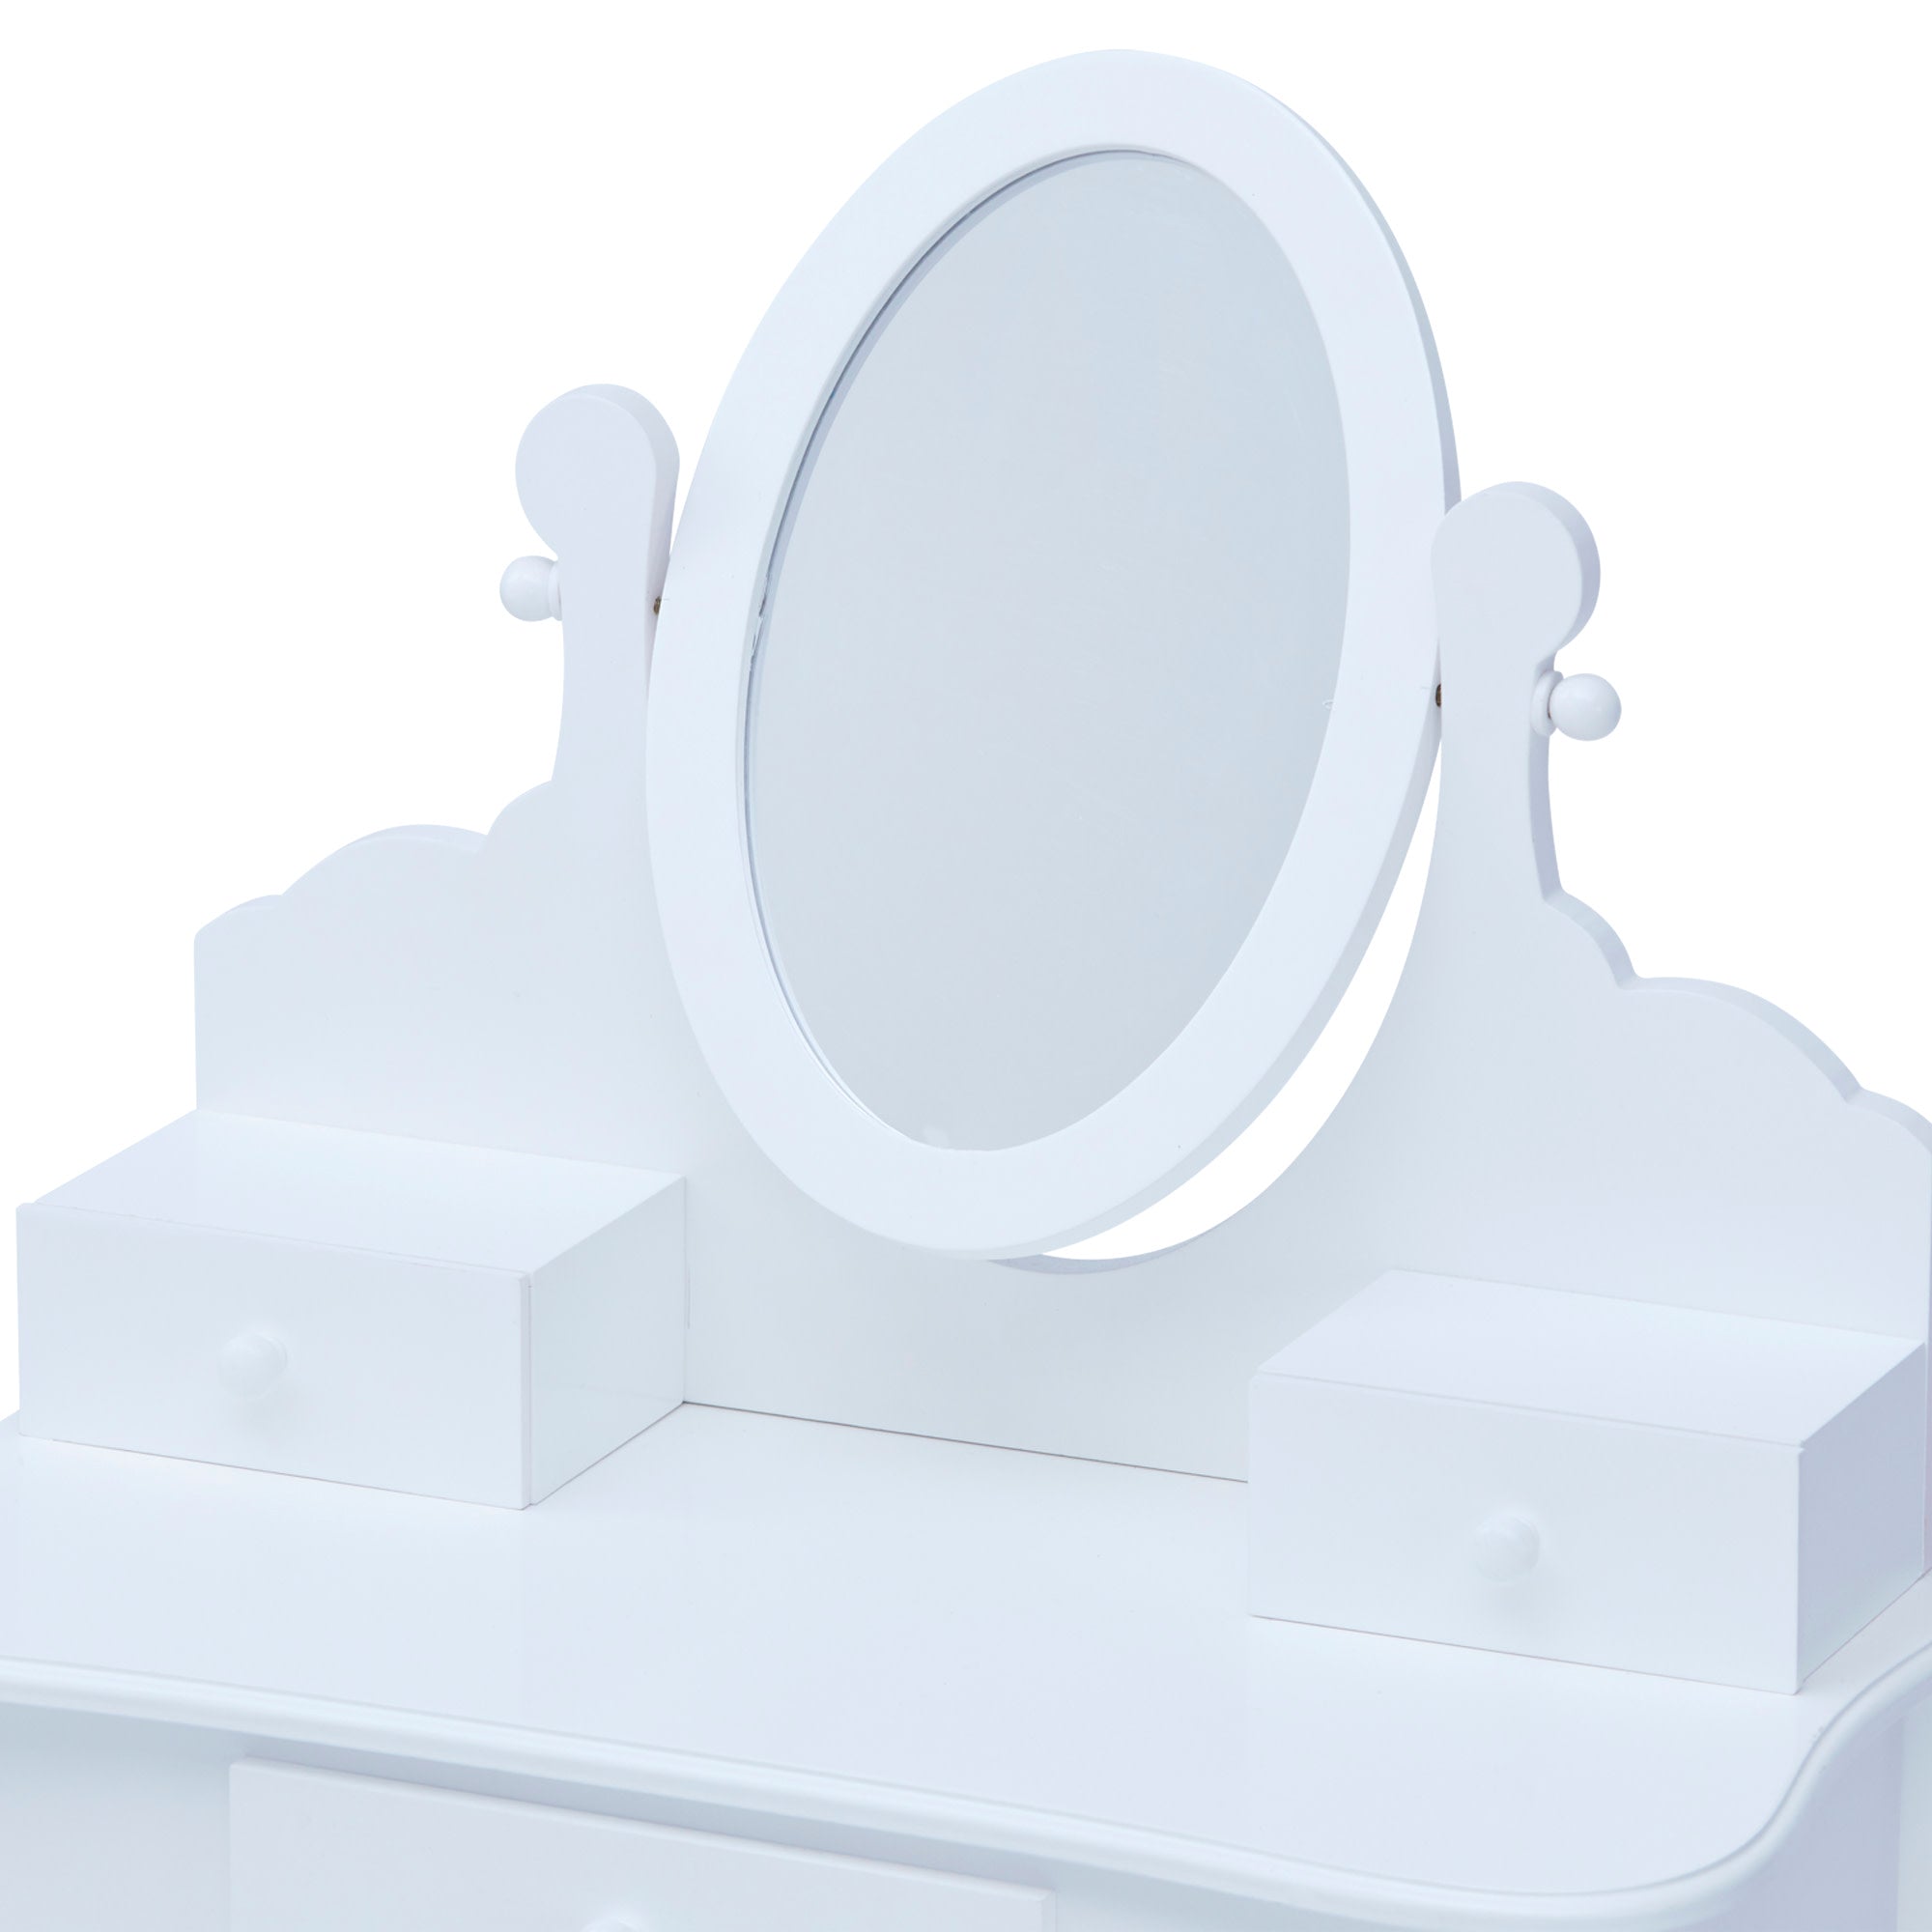 Fantasy Fields Little Princess Rapunzel Vanity with Mirror, Drawers and Stool, White